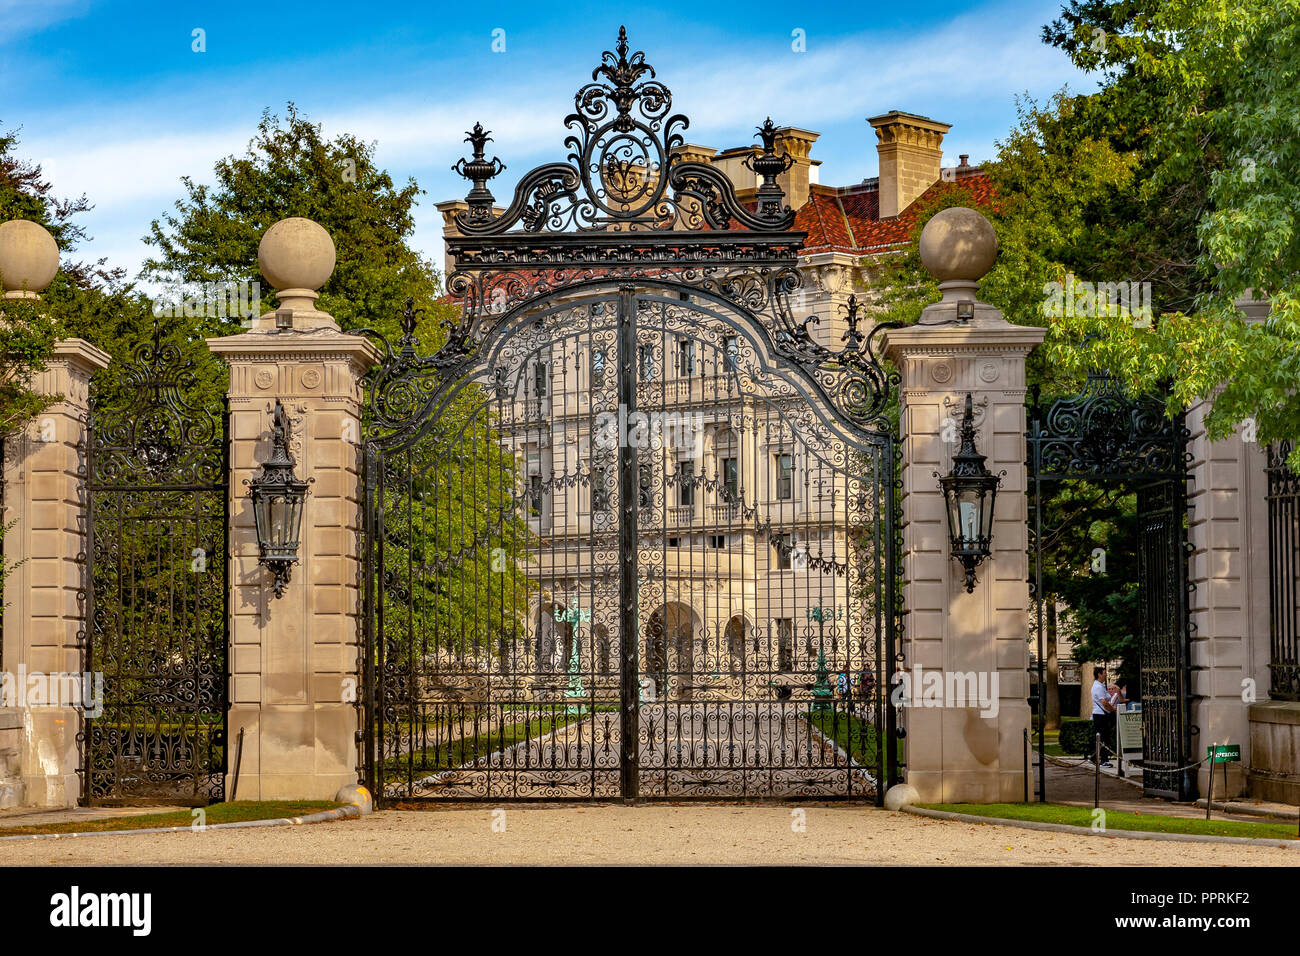 The Breakers is a Vanderbilt mansion located on Ochre Point Avenue, Newport, Rhode Island ,The Breakers is the grandest of all Newport's Mansions Stock Photo